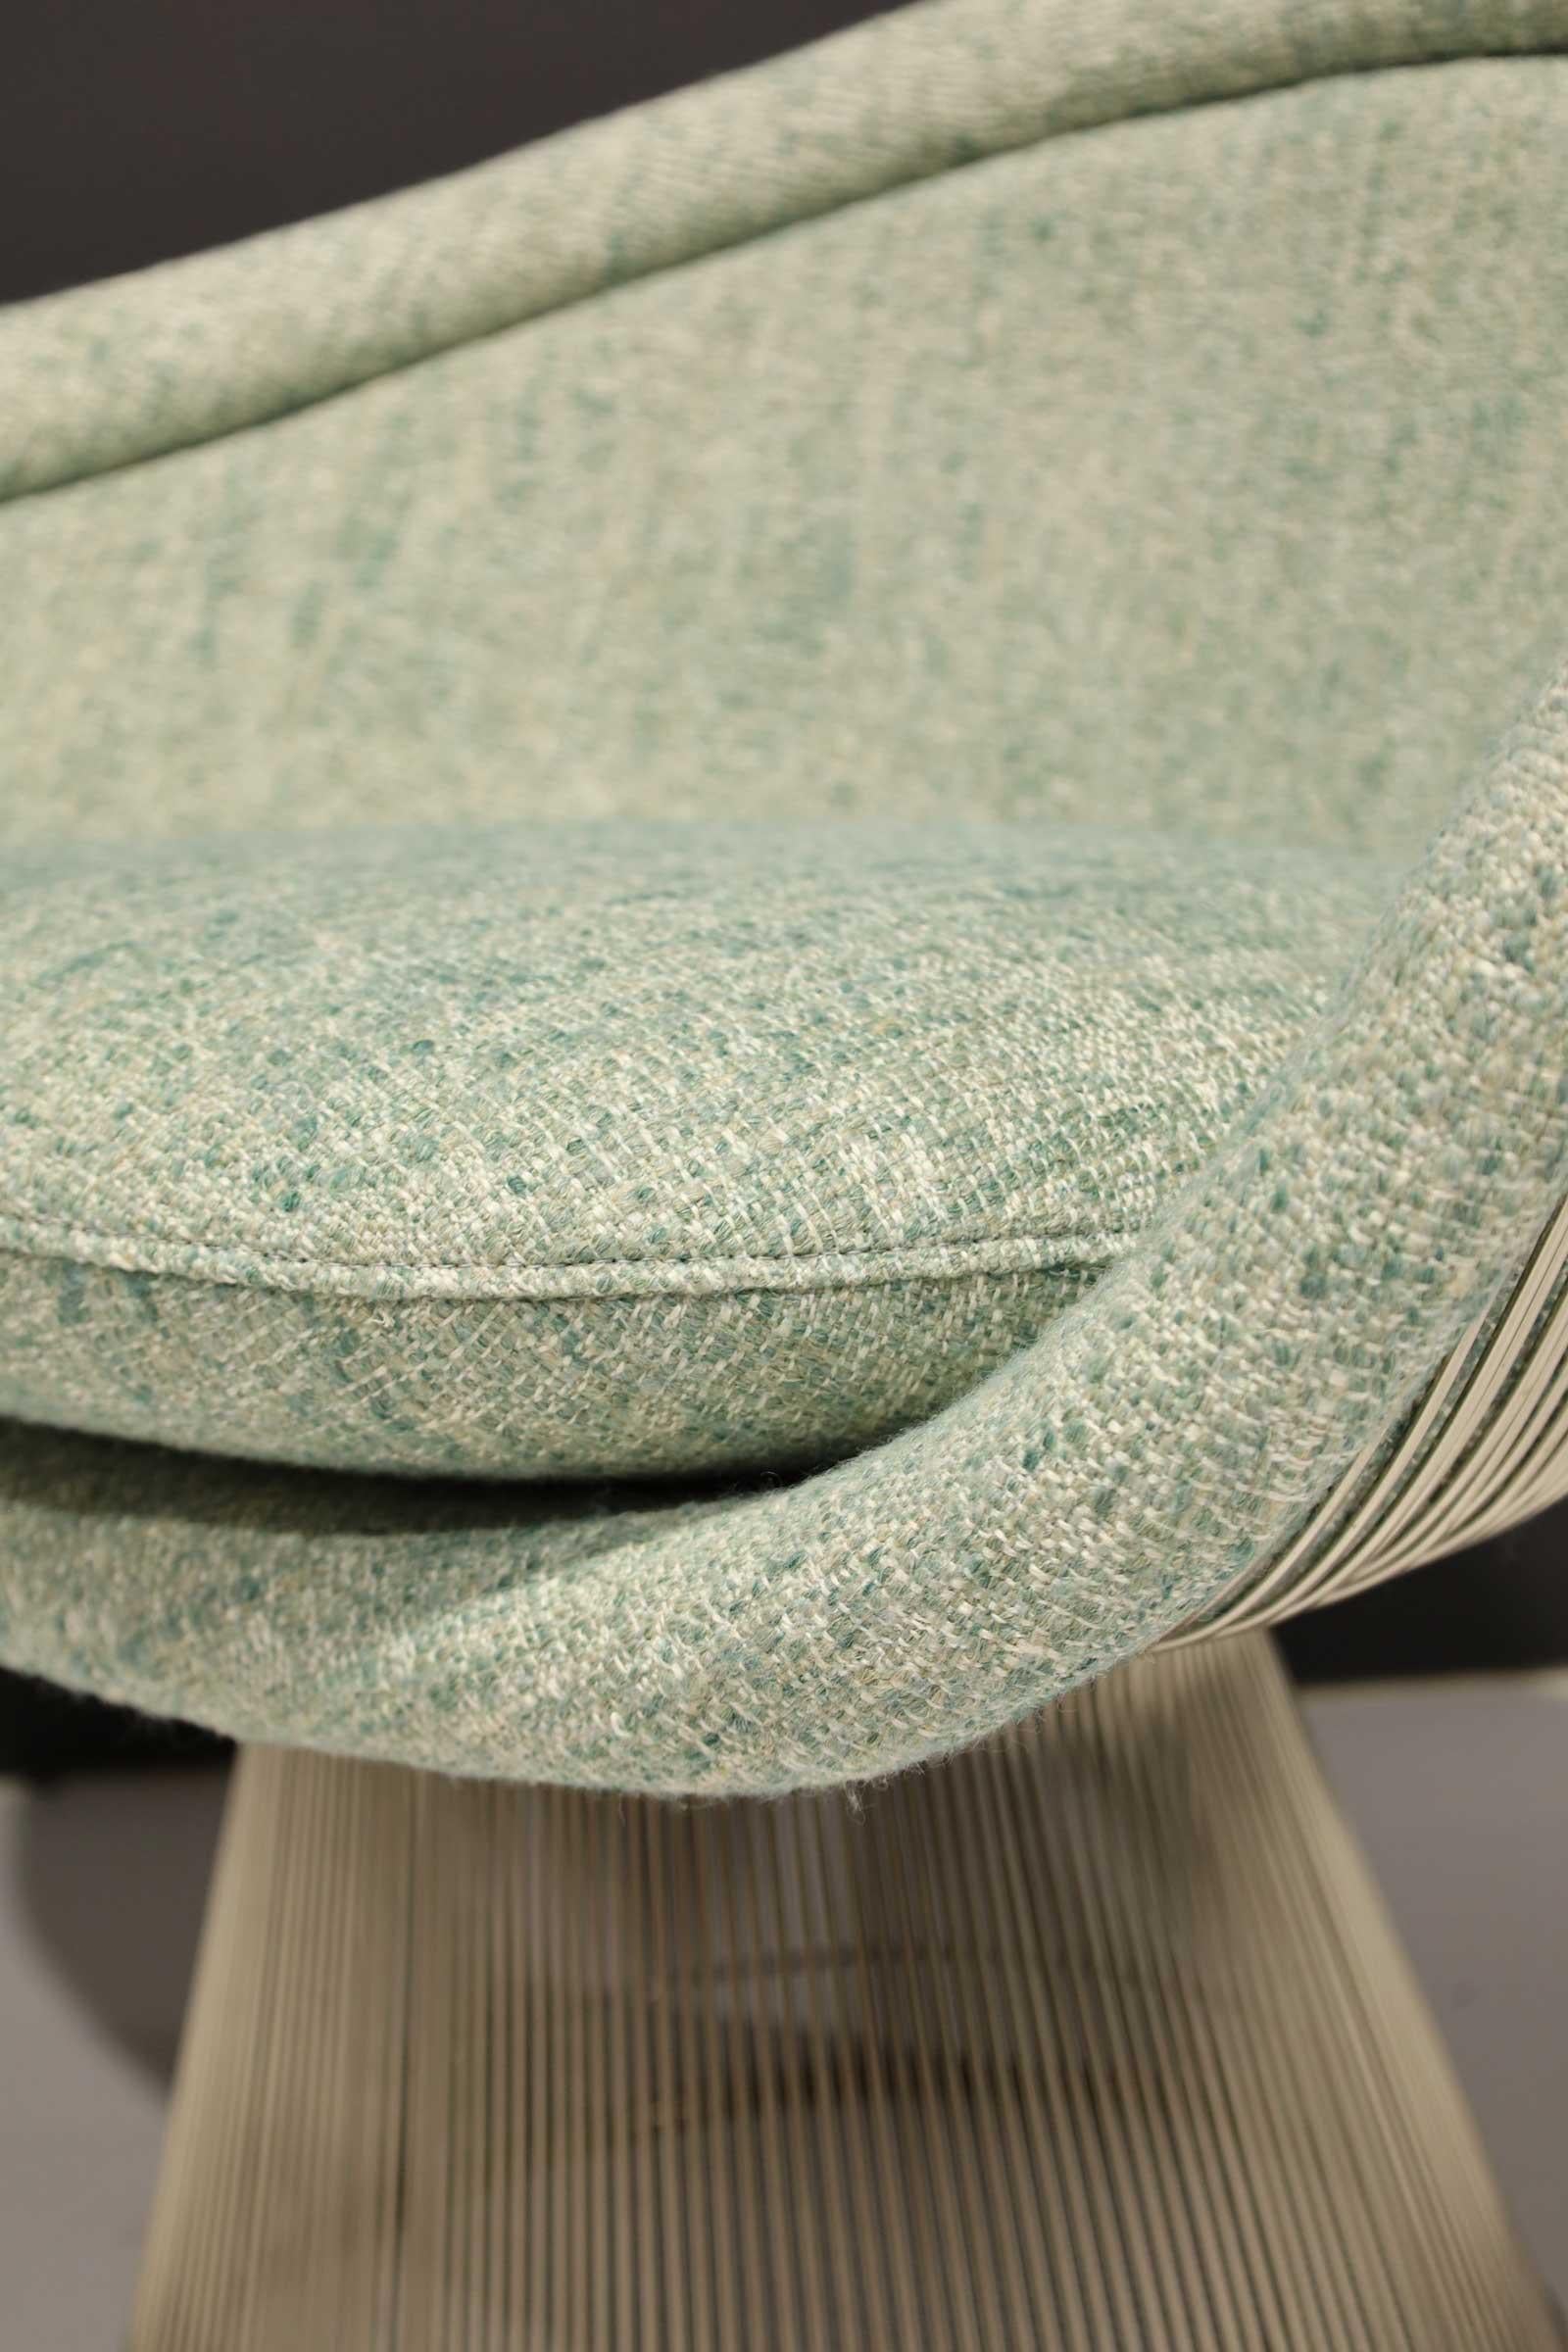 Upholstery Warren Platner for Knoll Lounge Chair in Green Woven Fabric